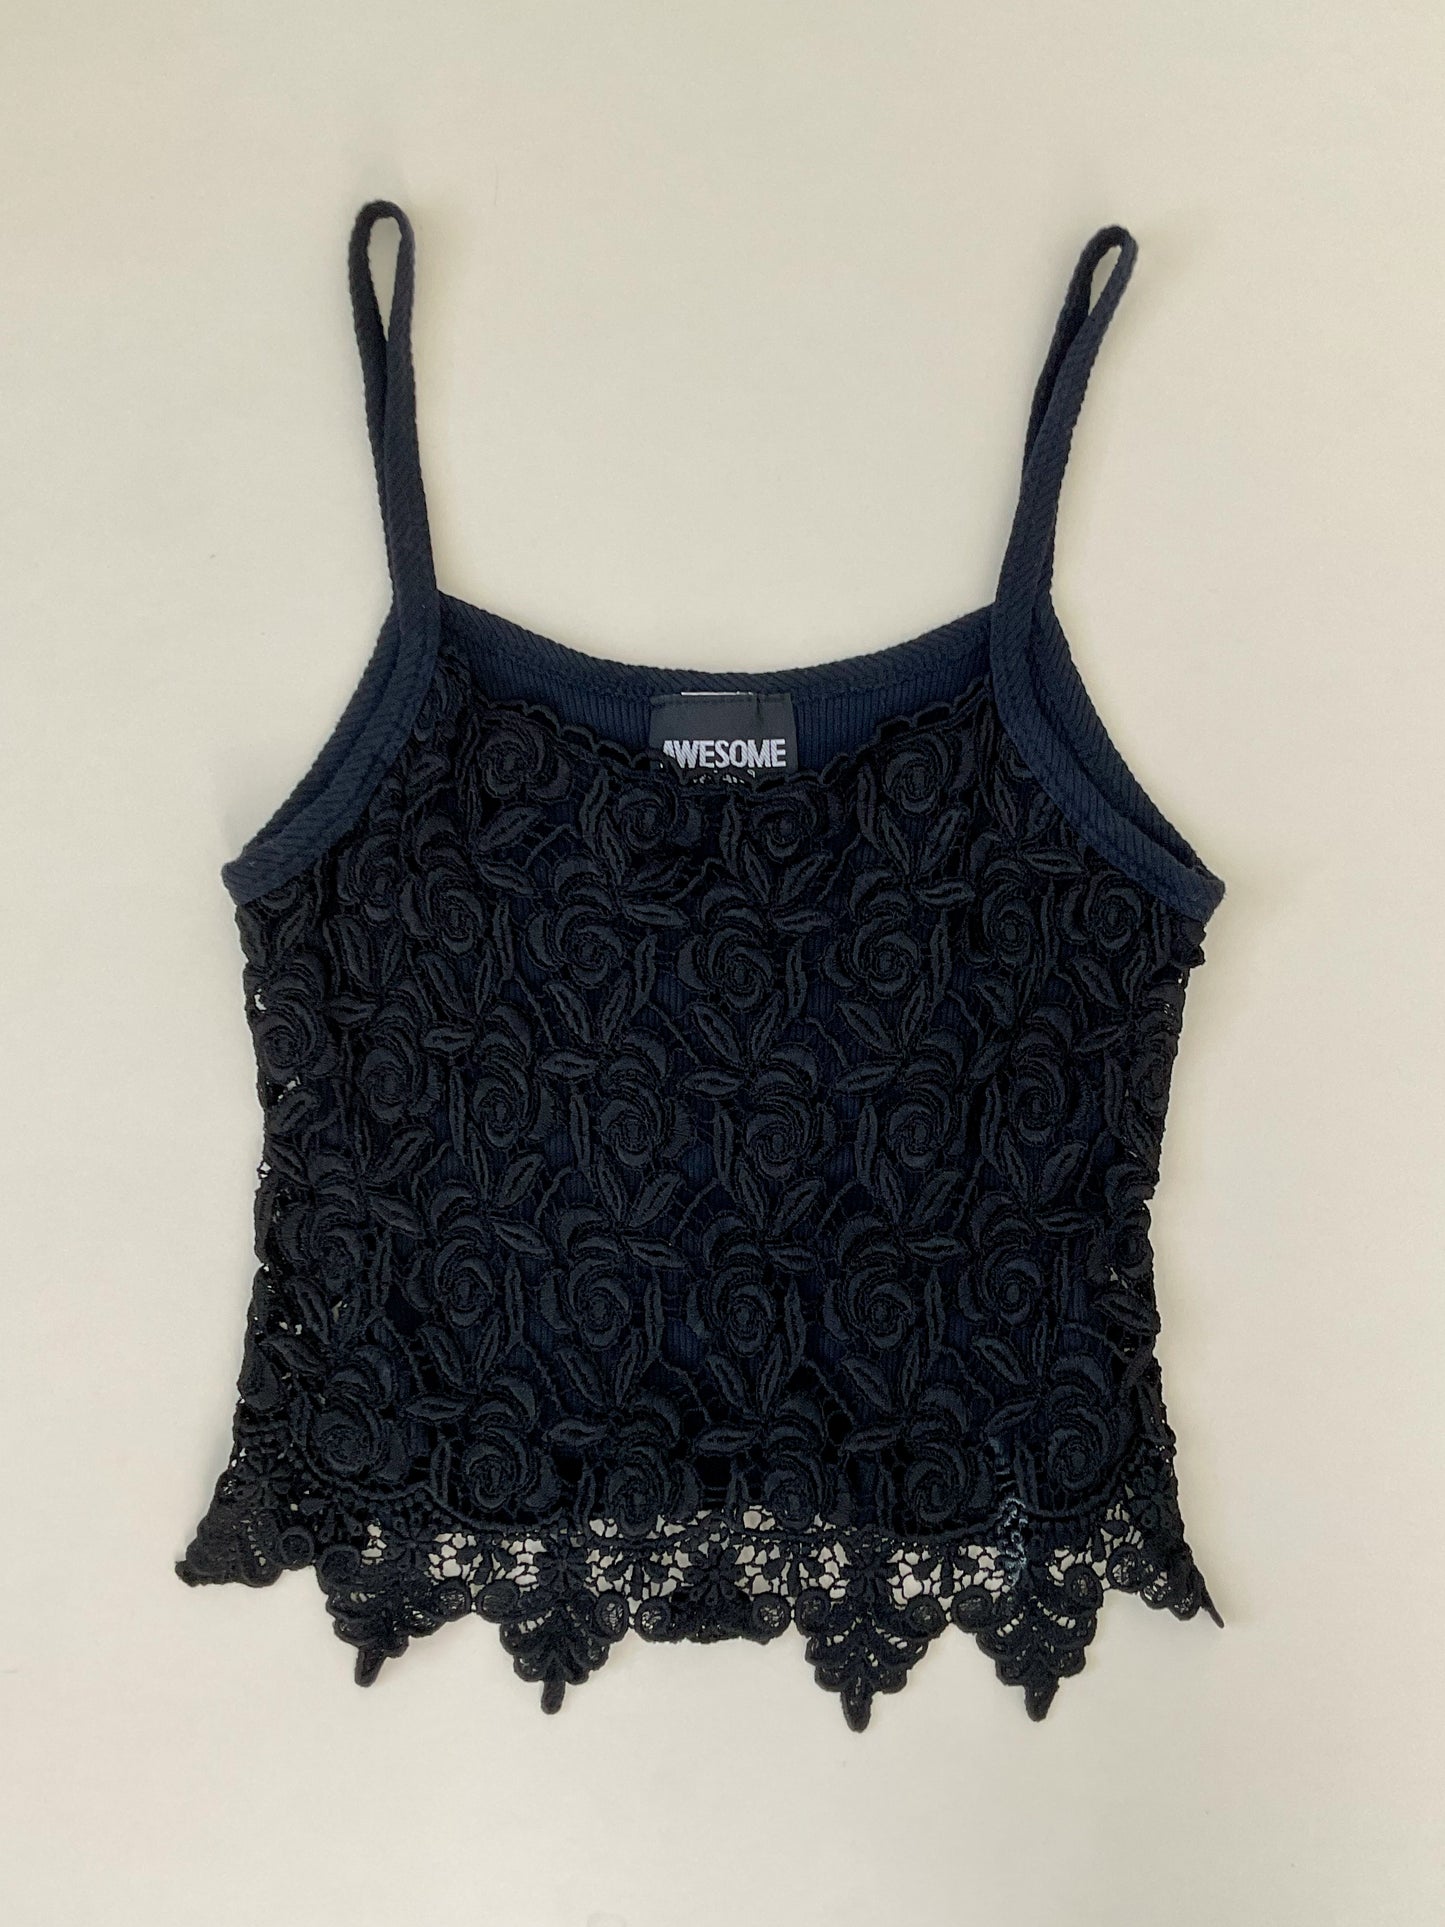 Vintage Lace "awesome" tank